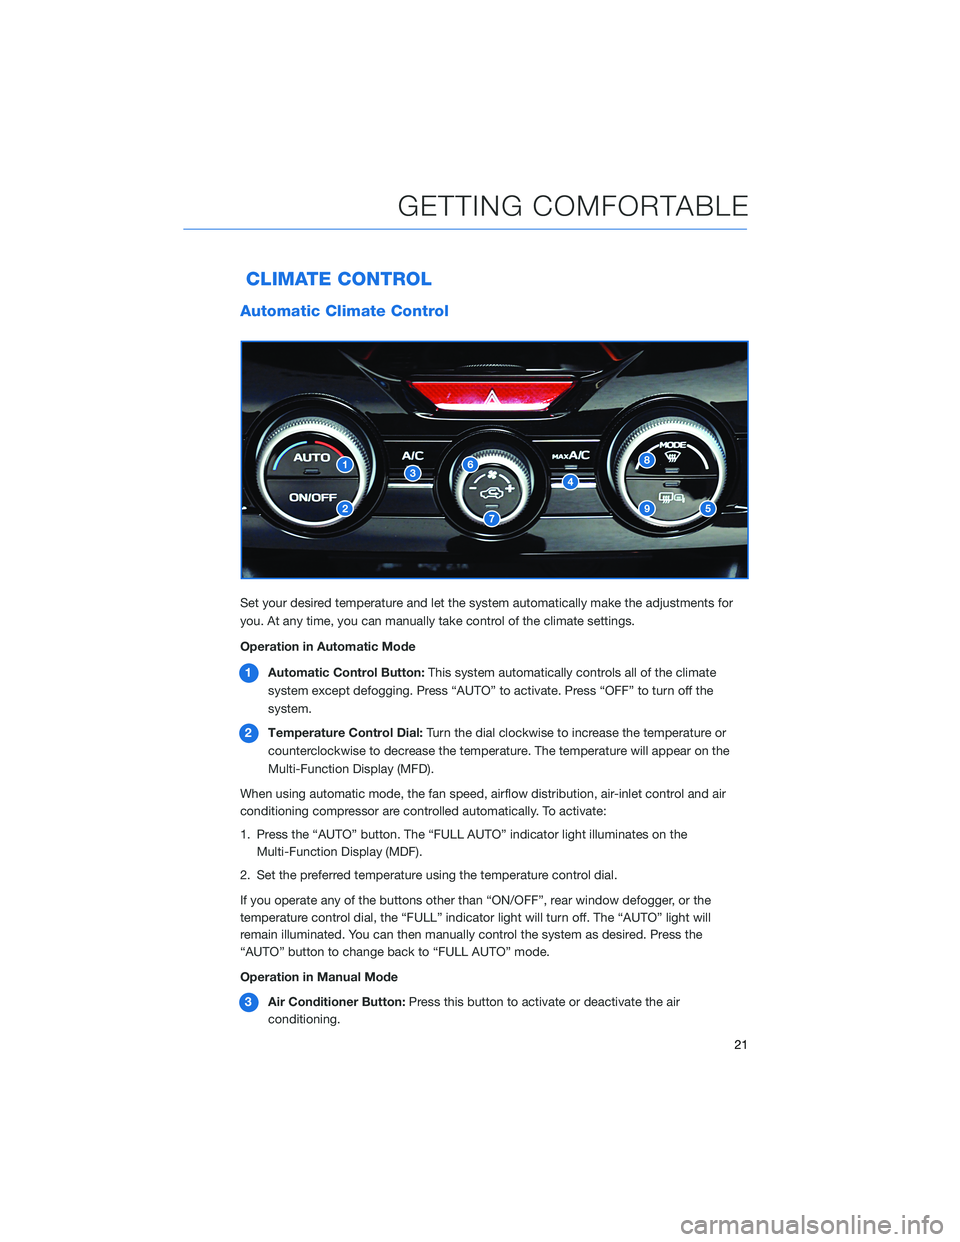 SUBARU FORESTER 2021  Getting Started Guide CLIMATE CONTROL
Automatic Climate Control
Set your desired temperature and let the system automatically make the adjustments for
you. At any time, you can manually take control of the climate settings